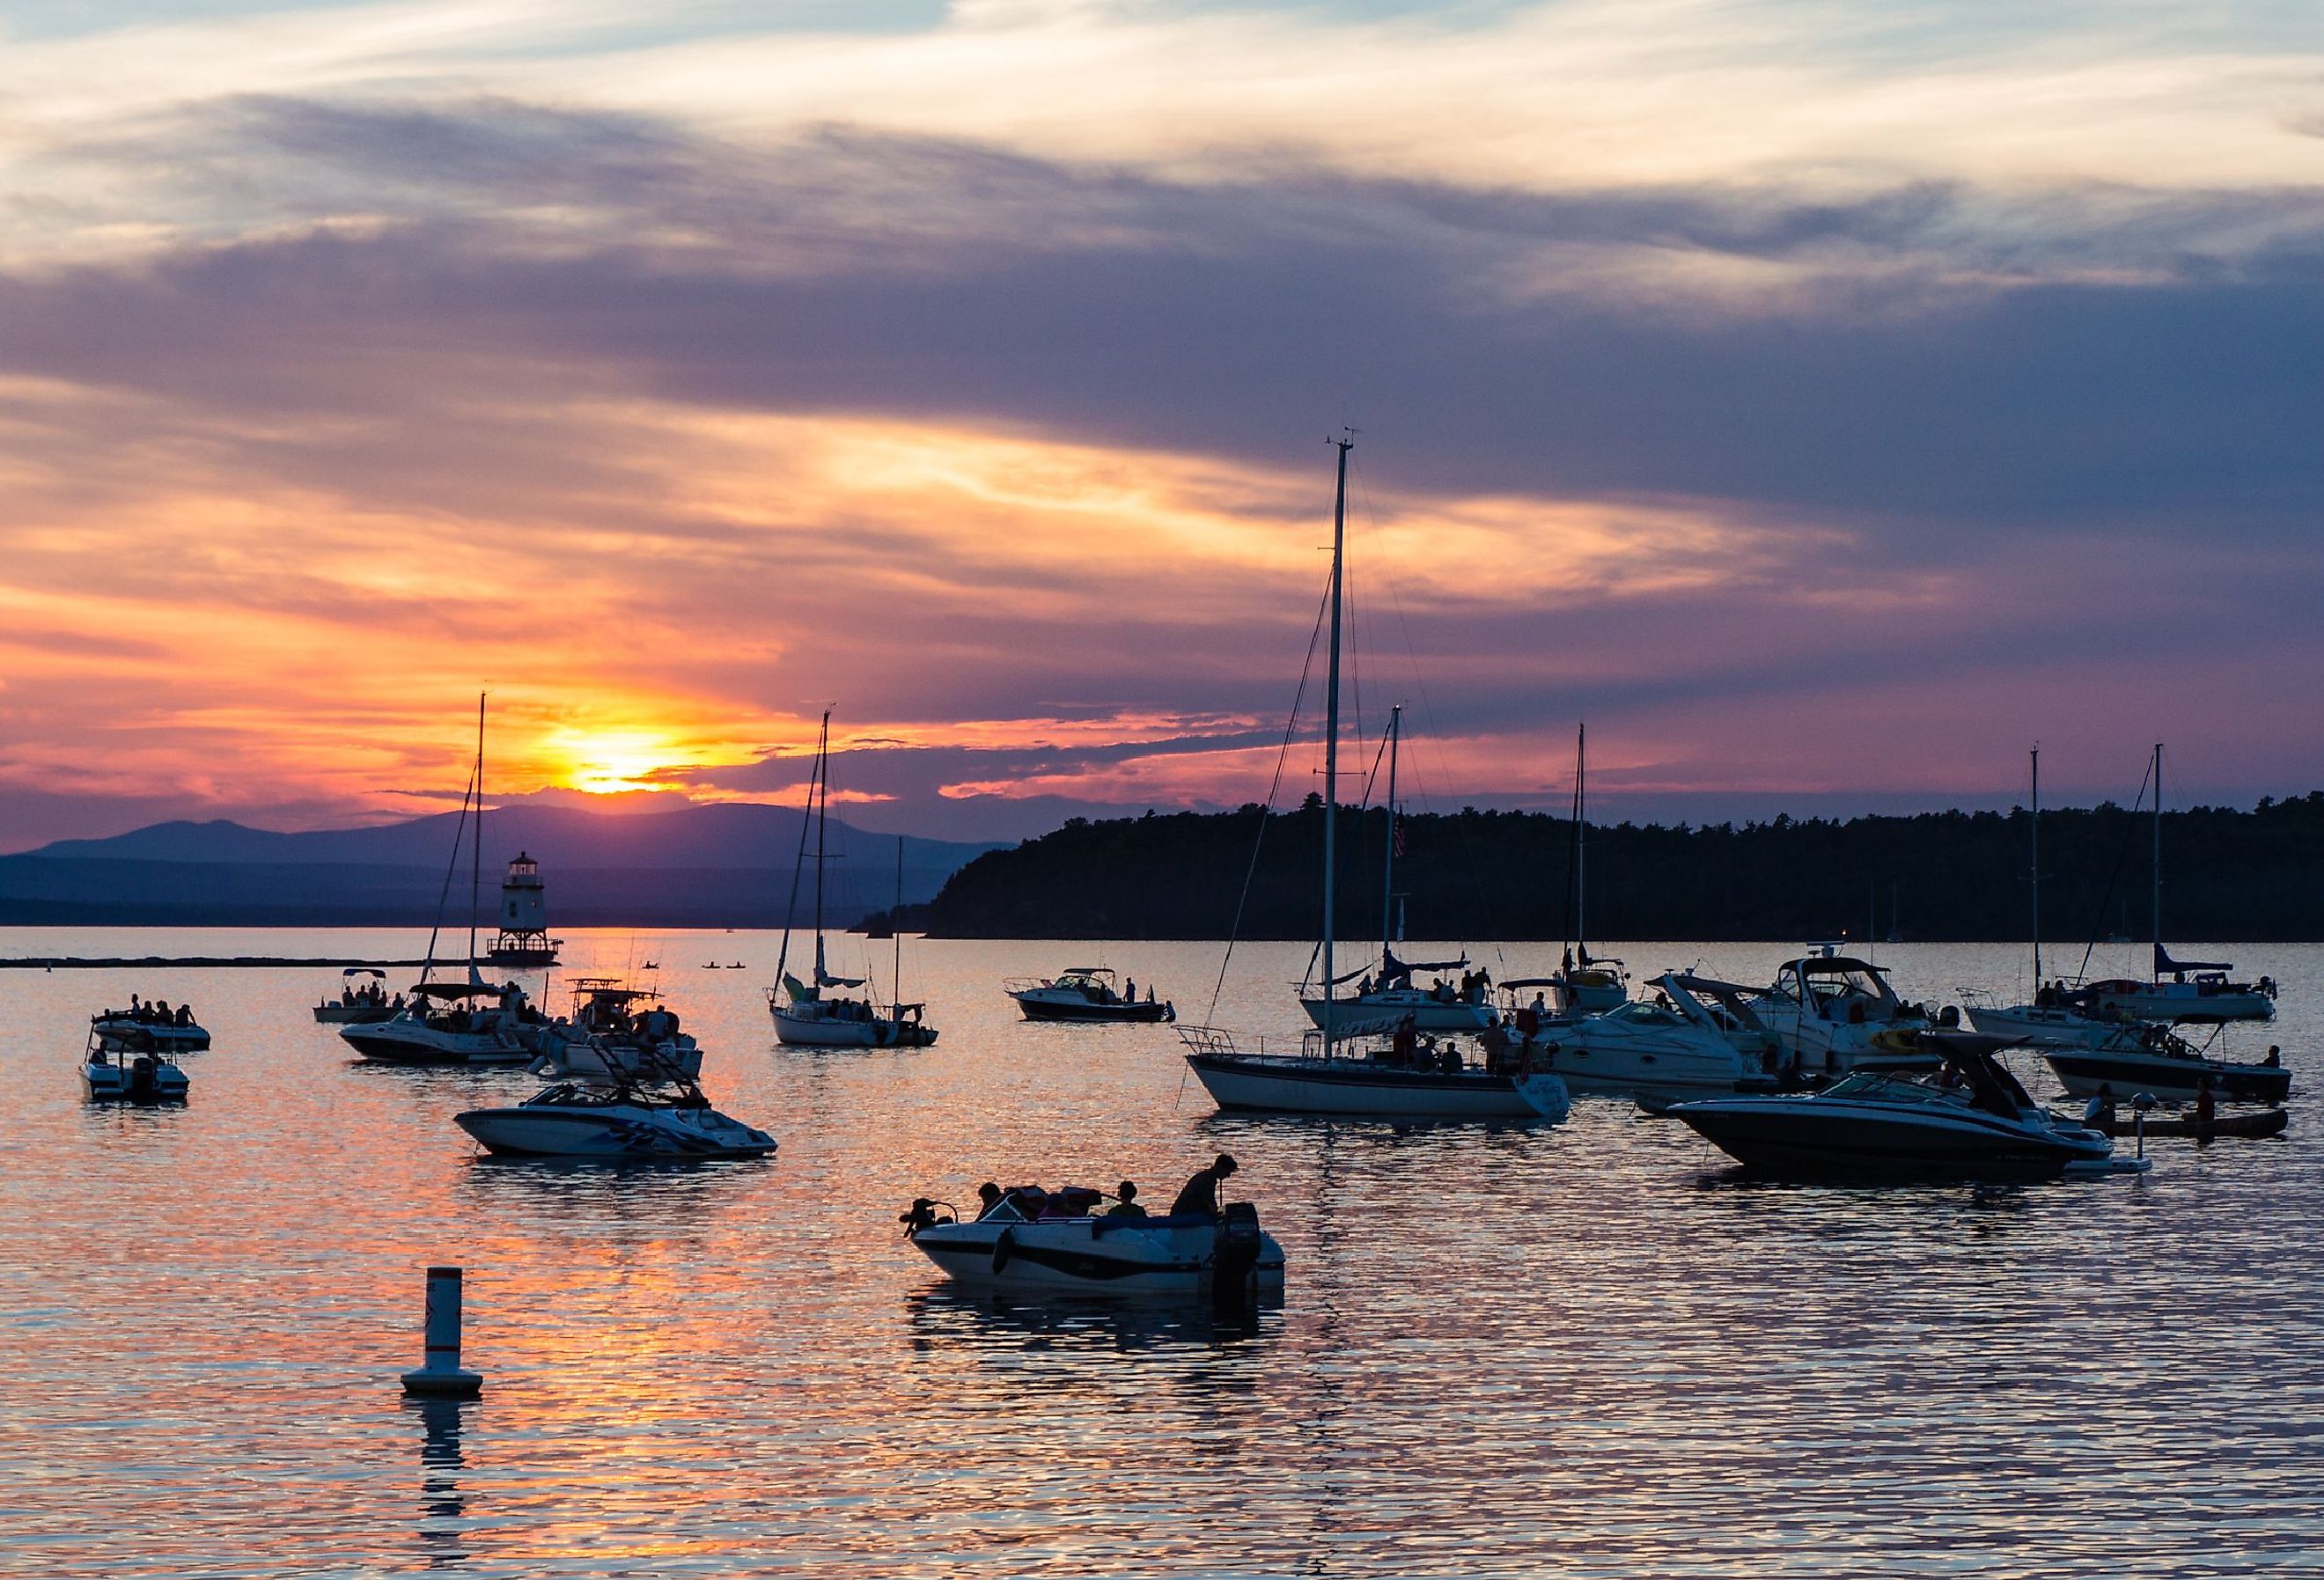 Boaters watching the sunset on Lake Champlain on a summer evening in Vermont. Image credit vermontalm via Shutterstock.